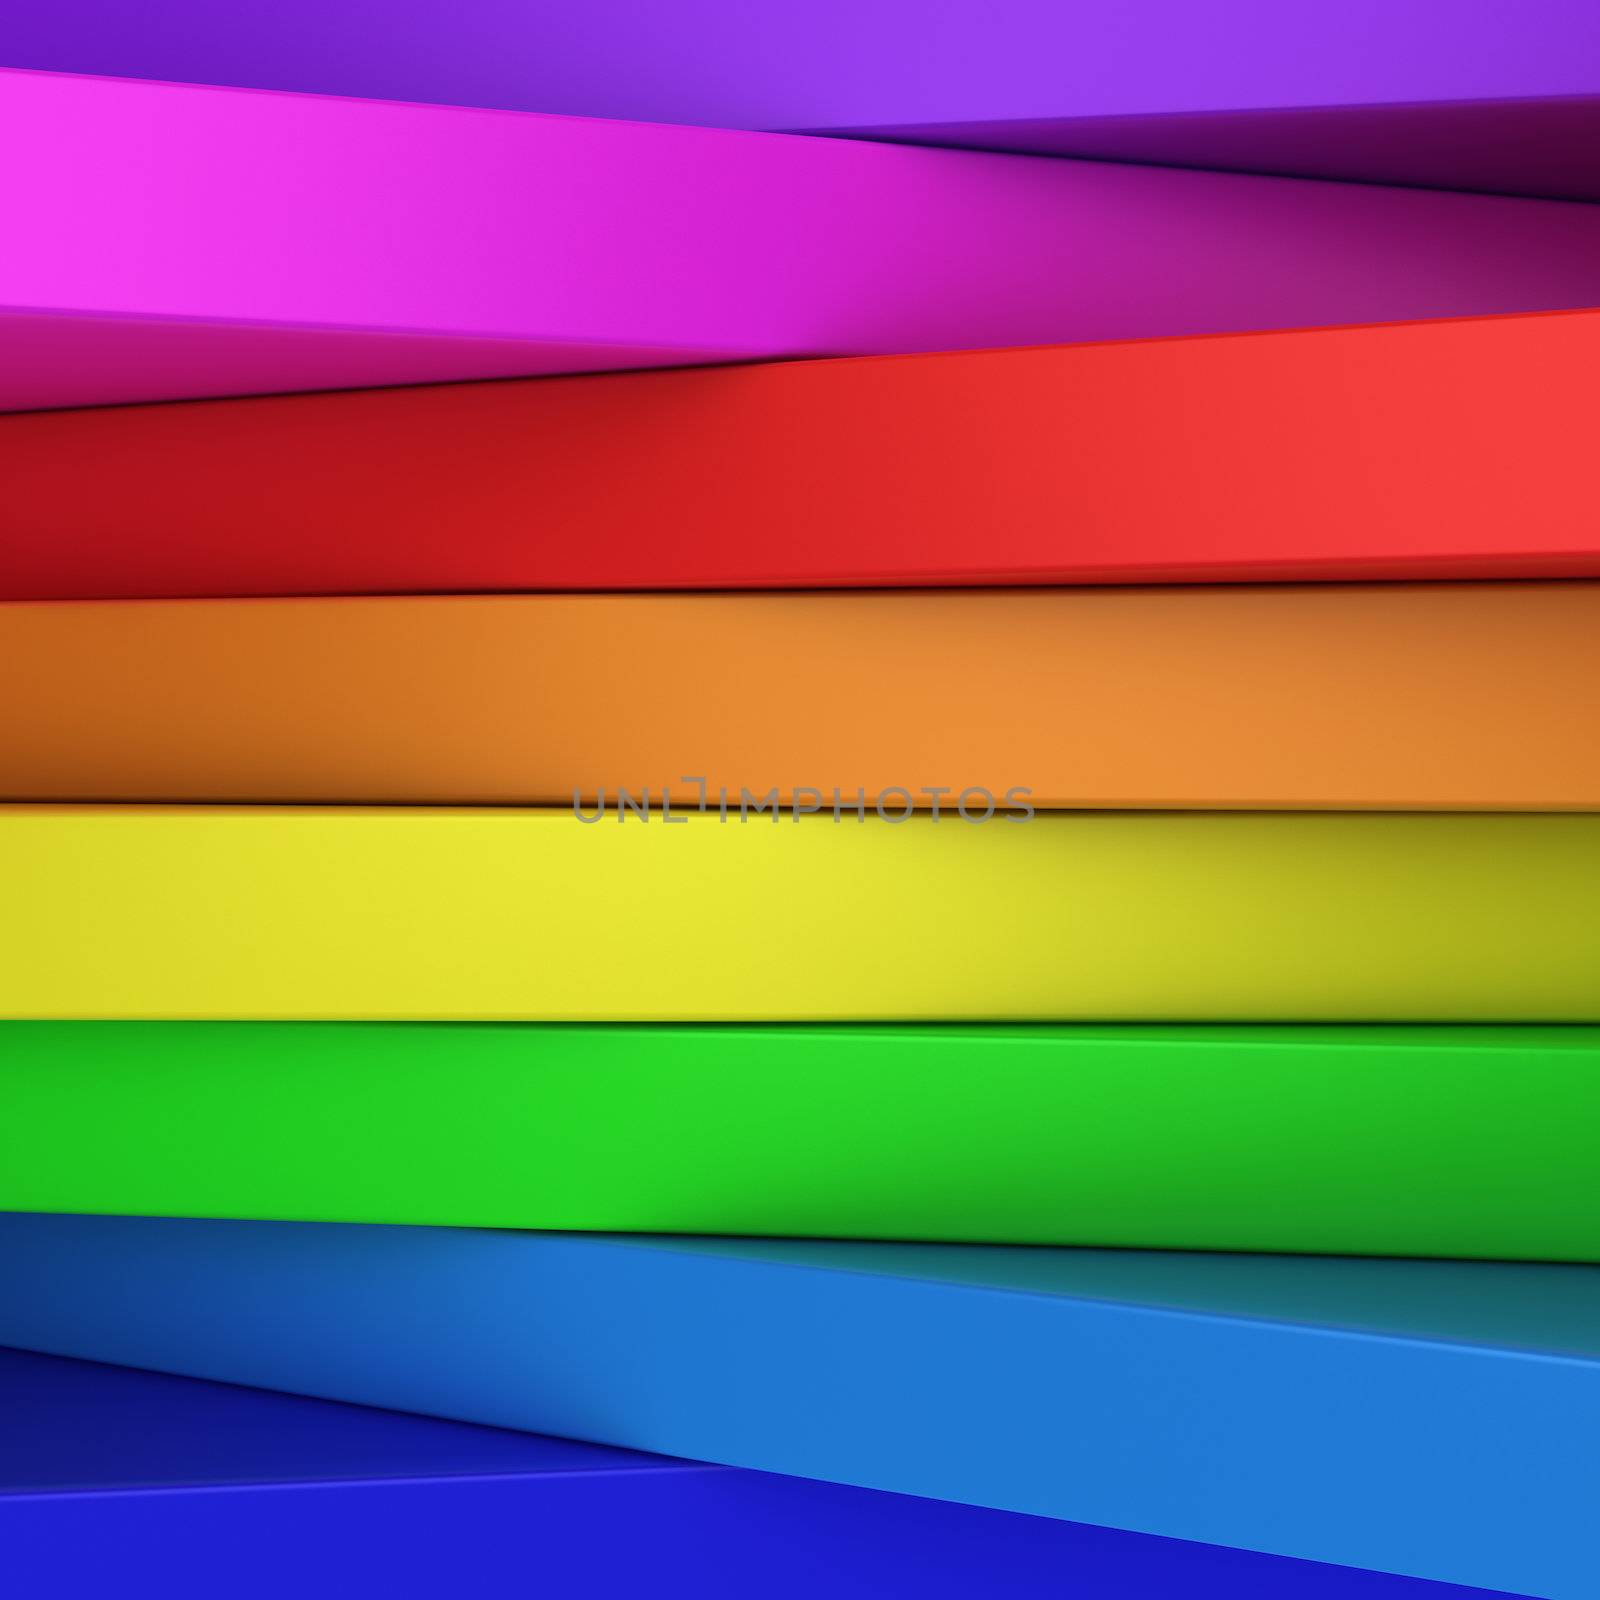 Abstract rainbow-coloured panels with copyspace for text OR just vibrant 3D background